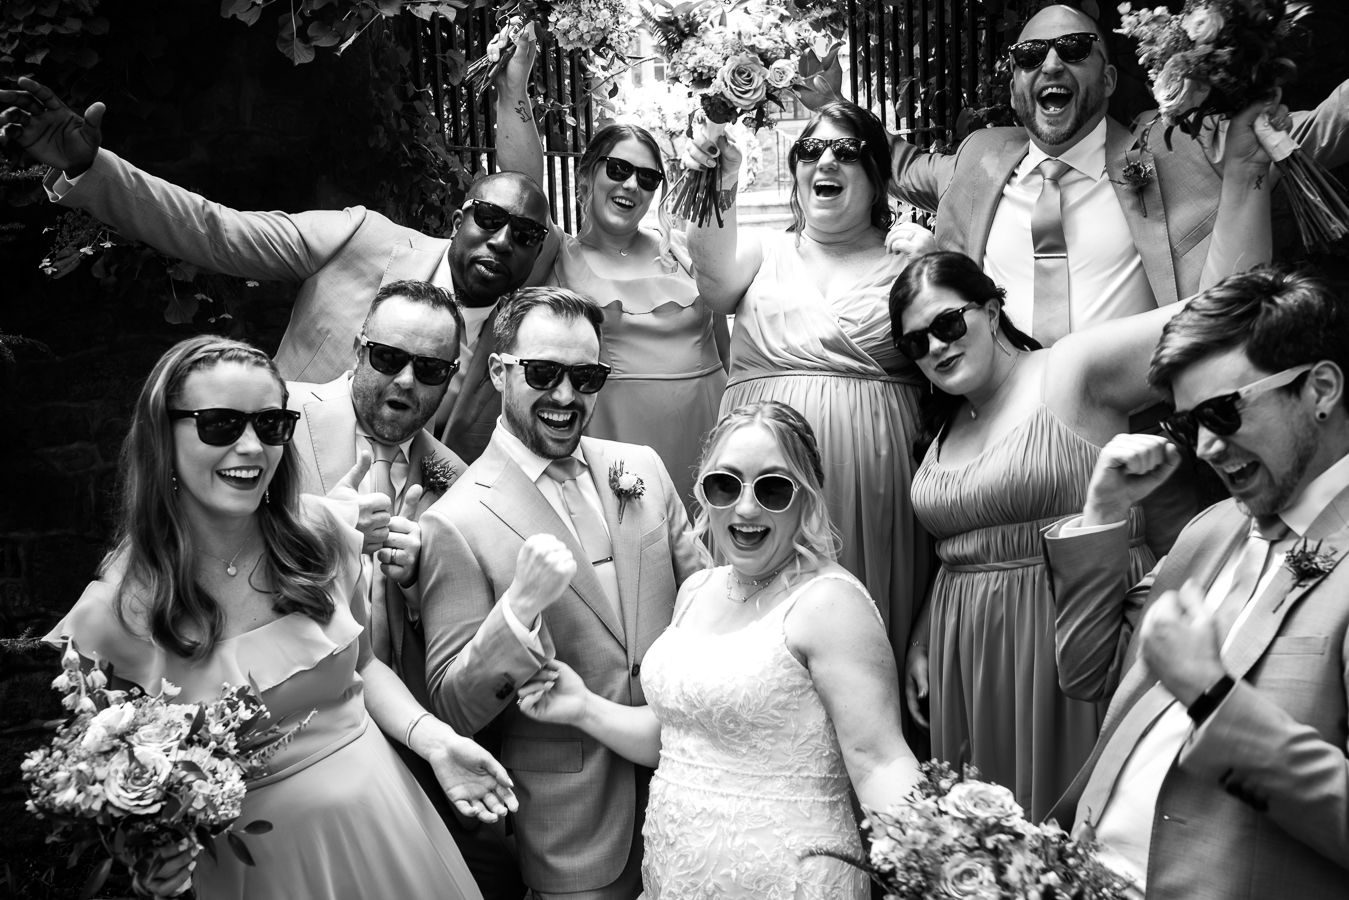 black and white image of the bride and groom with the wedding party all wearing sunglasses for a fun, unique image